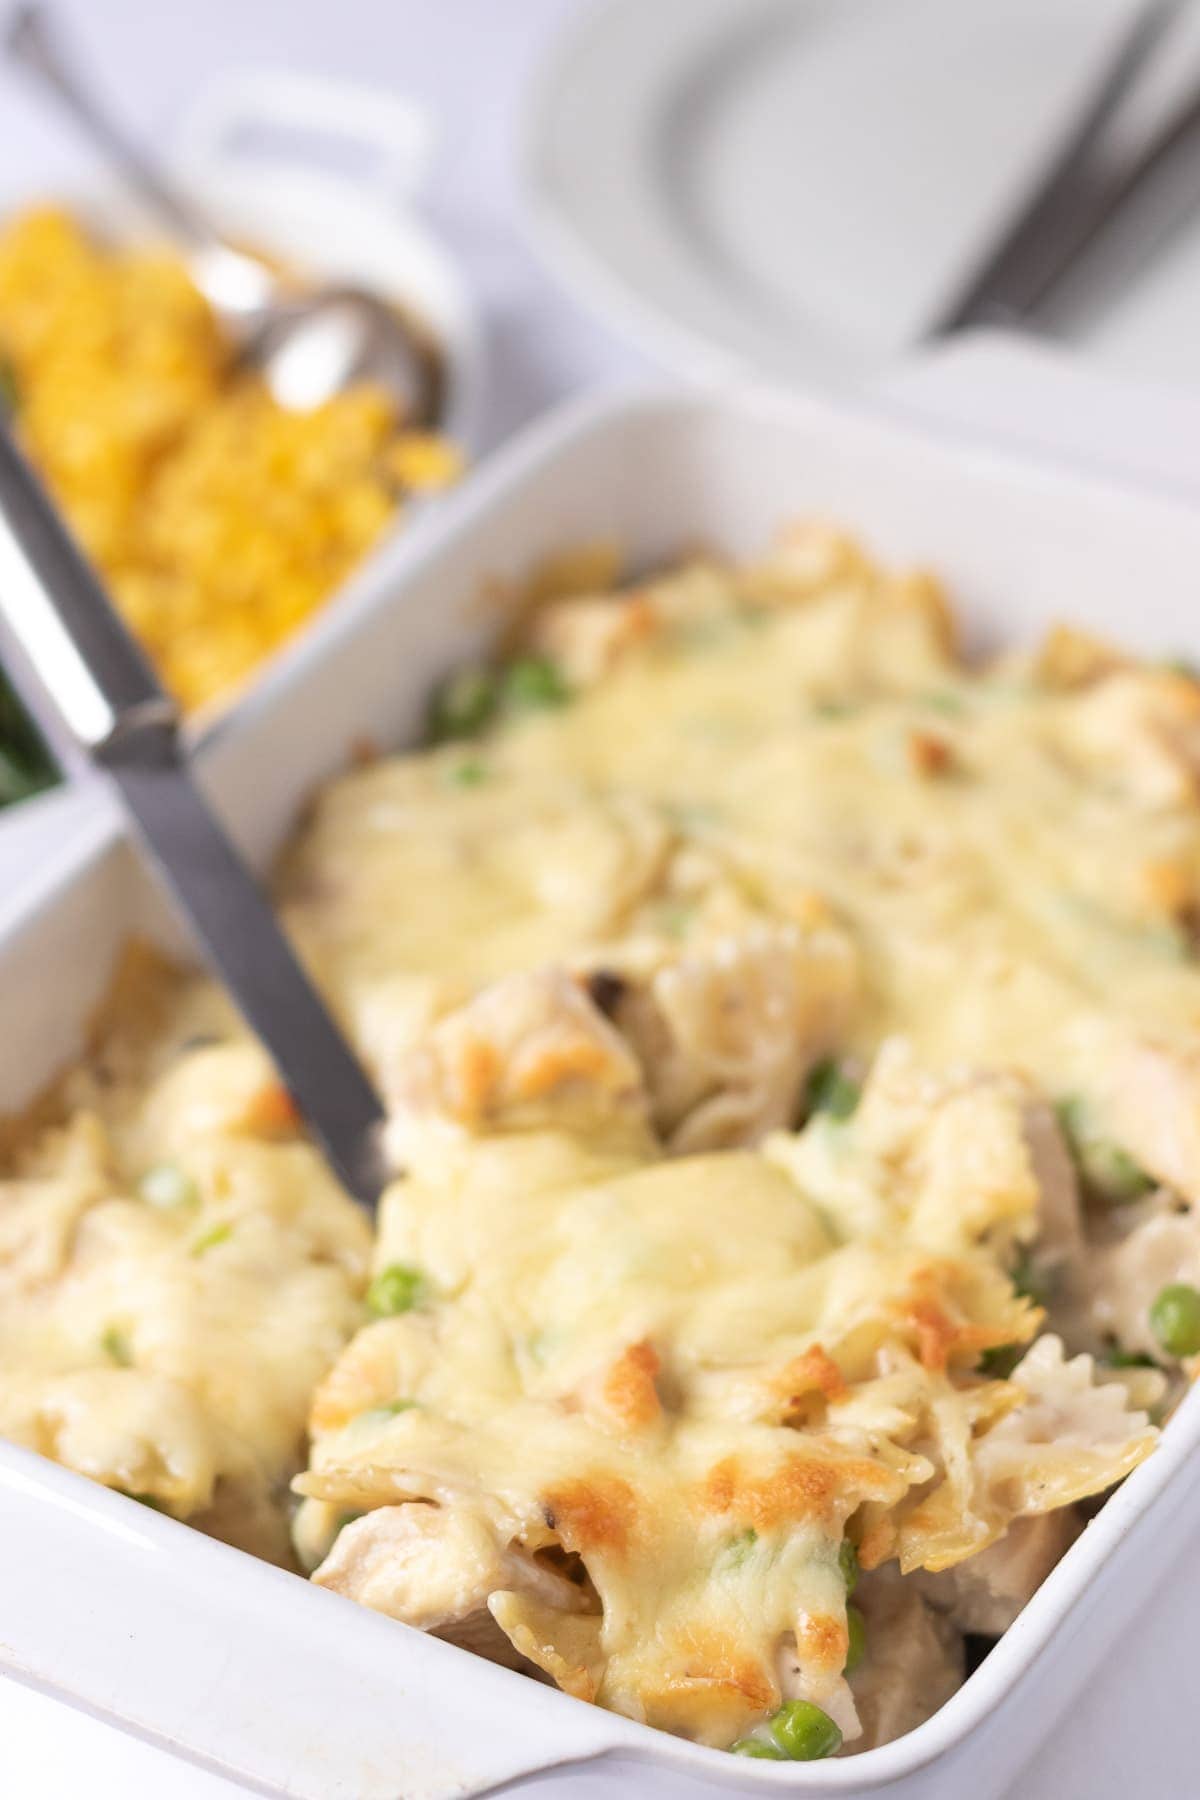 A serving spoon lifting out a portion of honey mustard chicken pasta bake from the casserole dish.